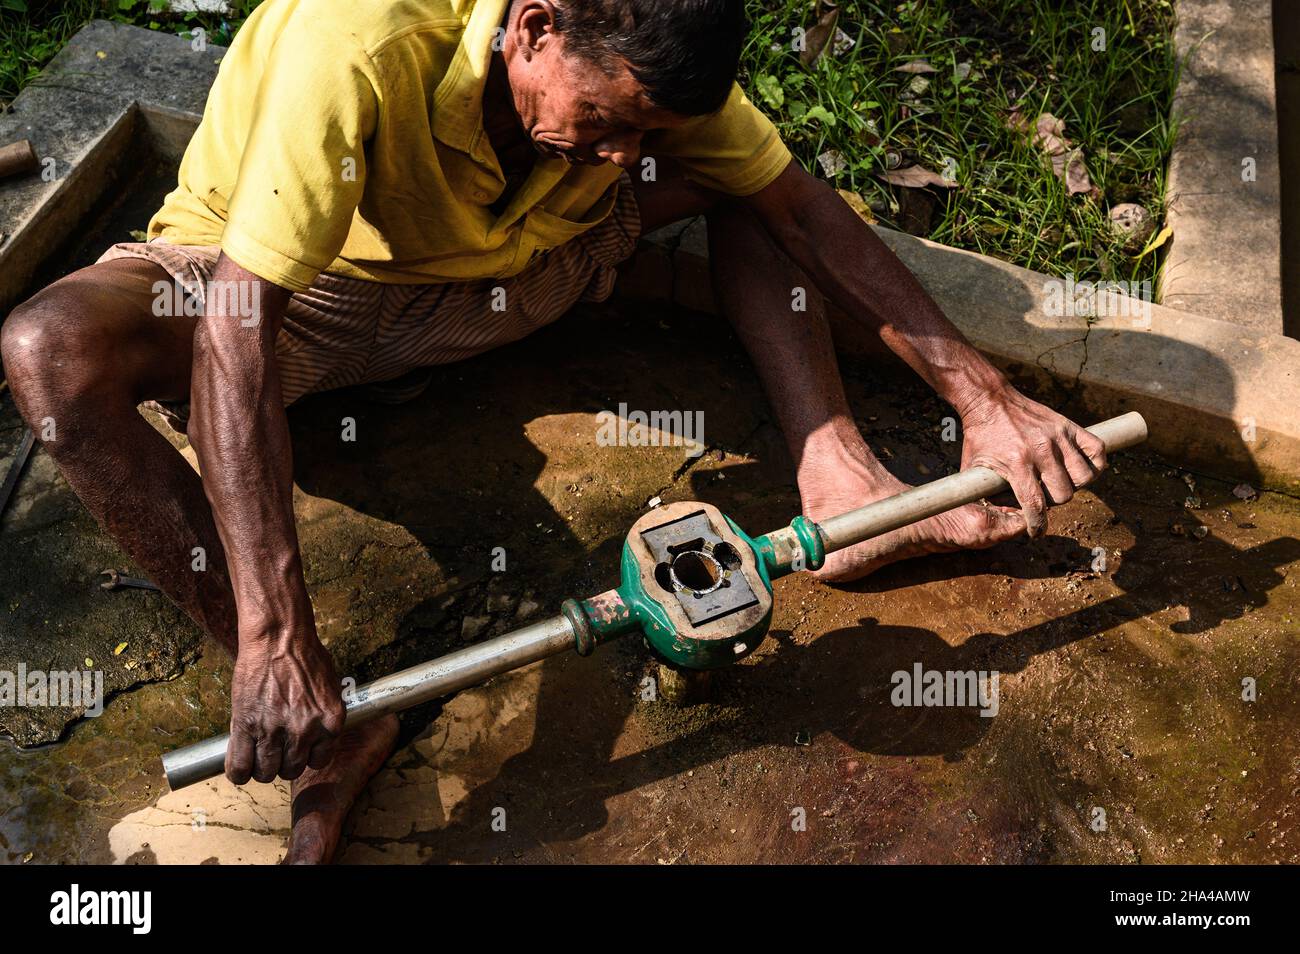 Tehatta, India. 08th Dec, 2021. A recent report published by the Reserve Bank of India (RBI) shows that the daily wage of rural workers in West Bengal is way below the national average. A worker is repairing a tubewell (hand pump) at Tehatta, West Bengal. (Photo by Soumyabrata Roy/Pacific Press) (Photo by Eric Dubost/Pacific Press) Credit: Pacific Press Media Production Corp./Alamy Live News Stock Photo